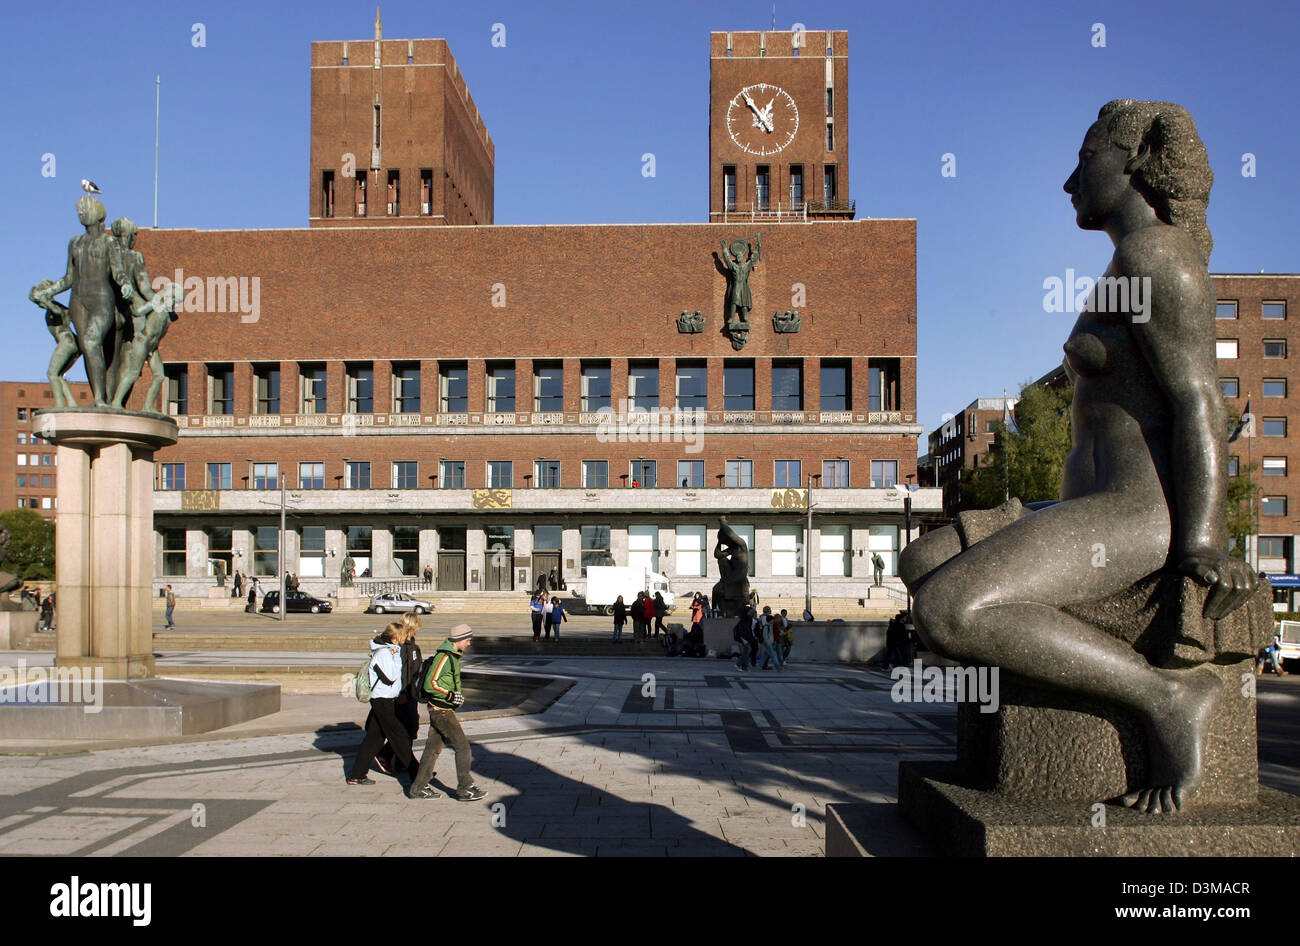 (dpa) - The picture shows the city hall with its two distinctive towers in Oslo, Norway, 24 October 2005. In the foreground is a bronze statue by Gustav Vigeland. The city hall was inaugurated in 1950 after more than 30 years of planning and construction. Photo: Ingo Wagner Stock Photo